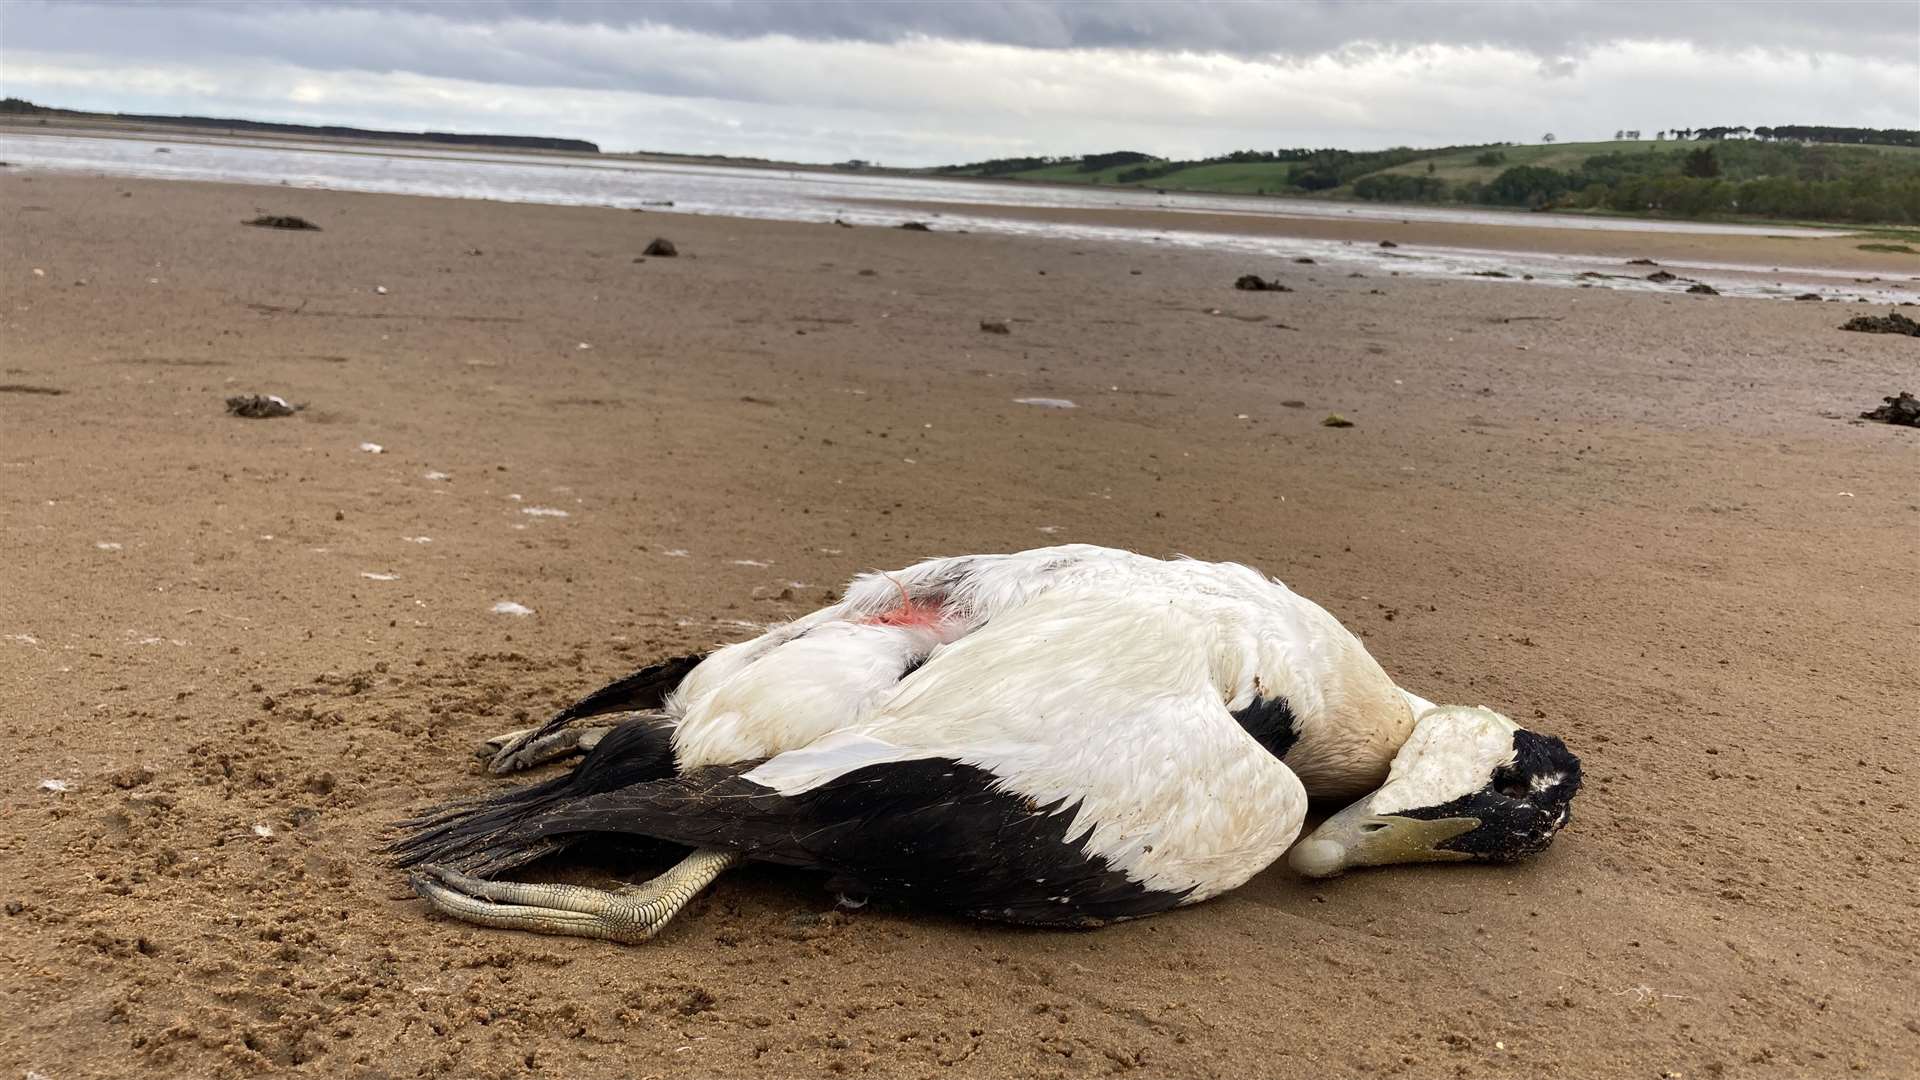 Eider ducks are among 20 different species of bird carcasses to have been discovered at Loch Fleet.